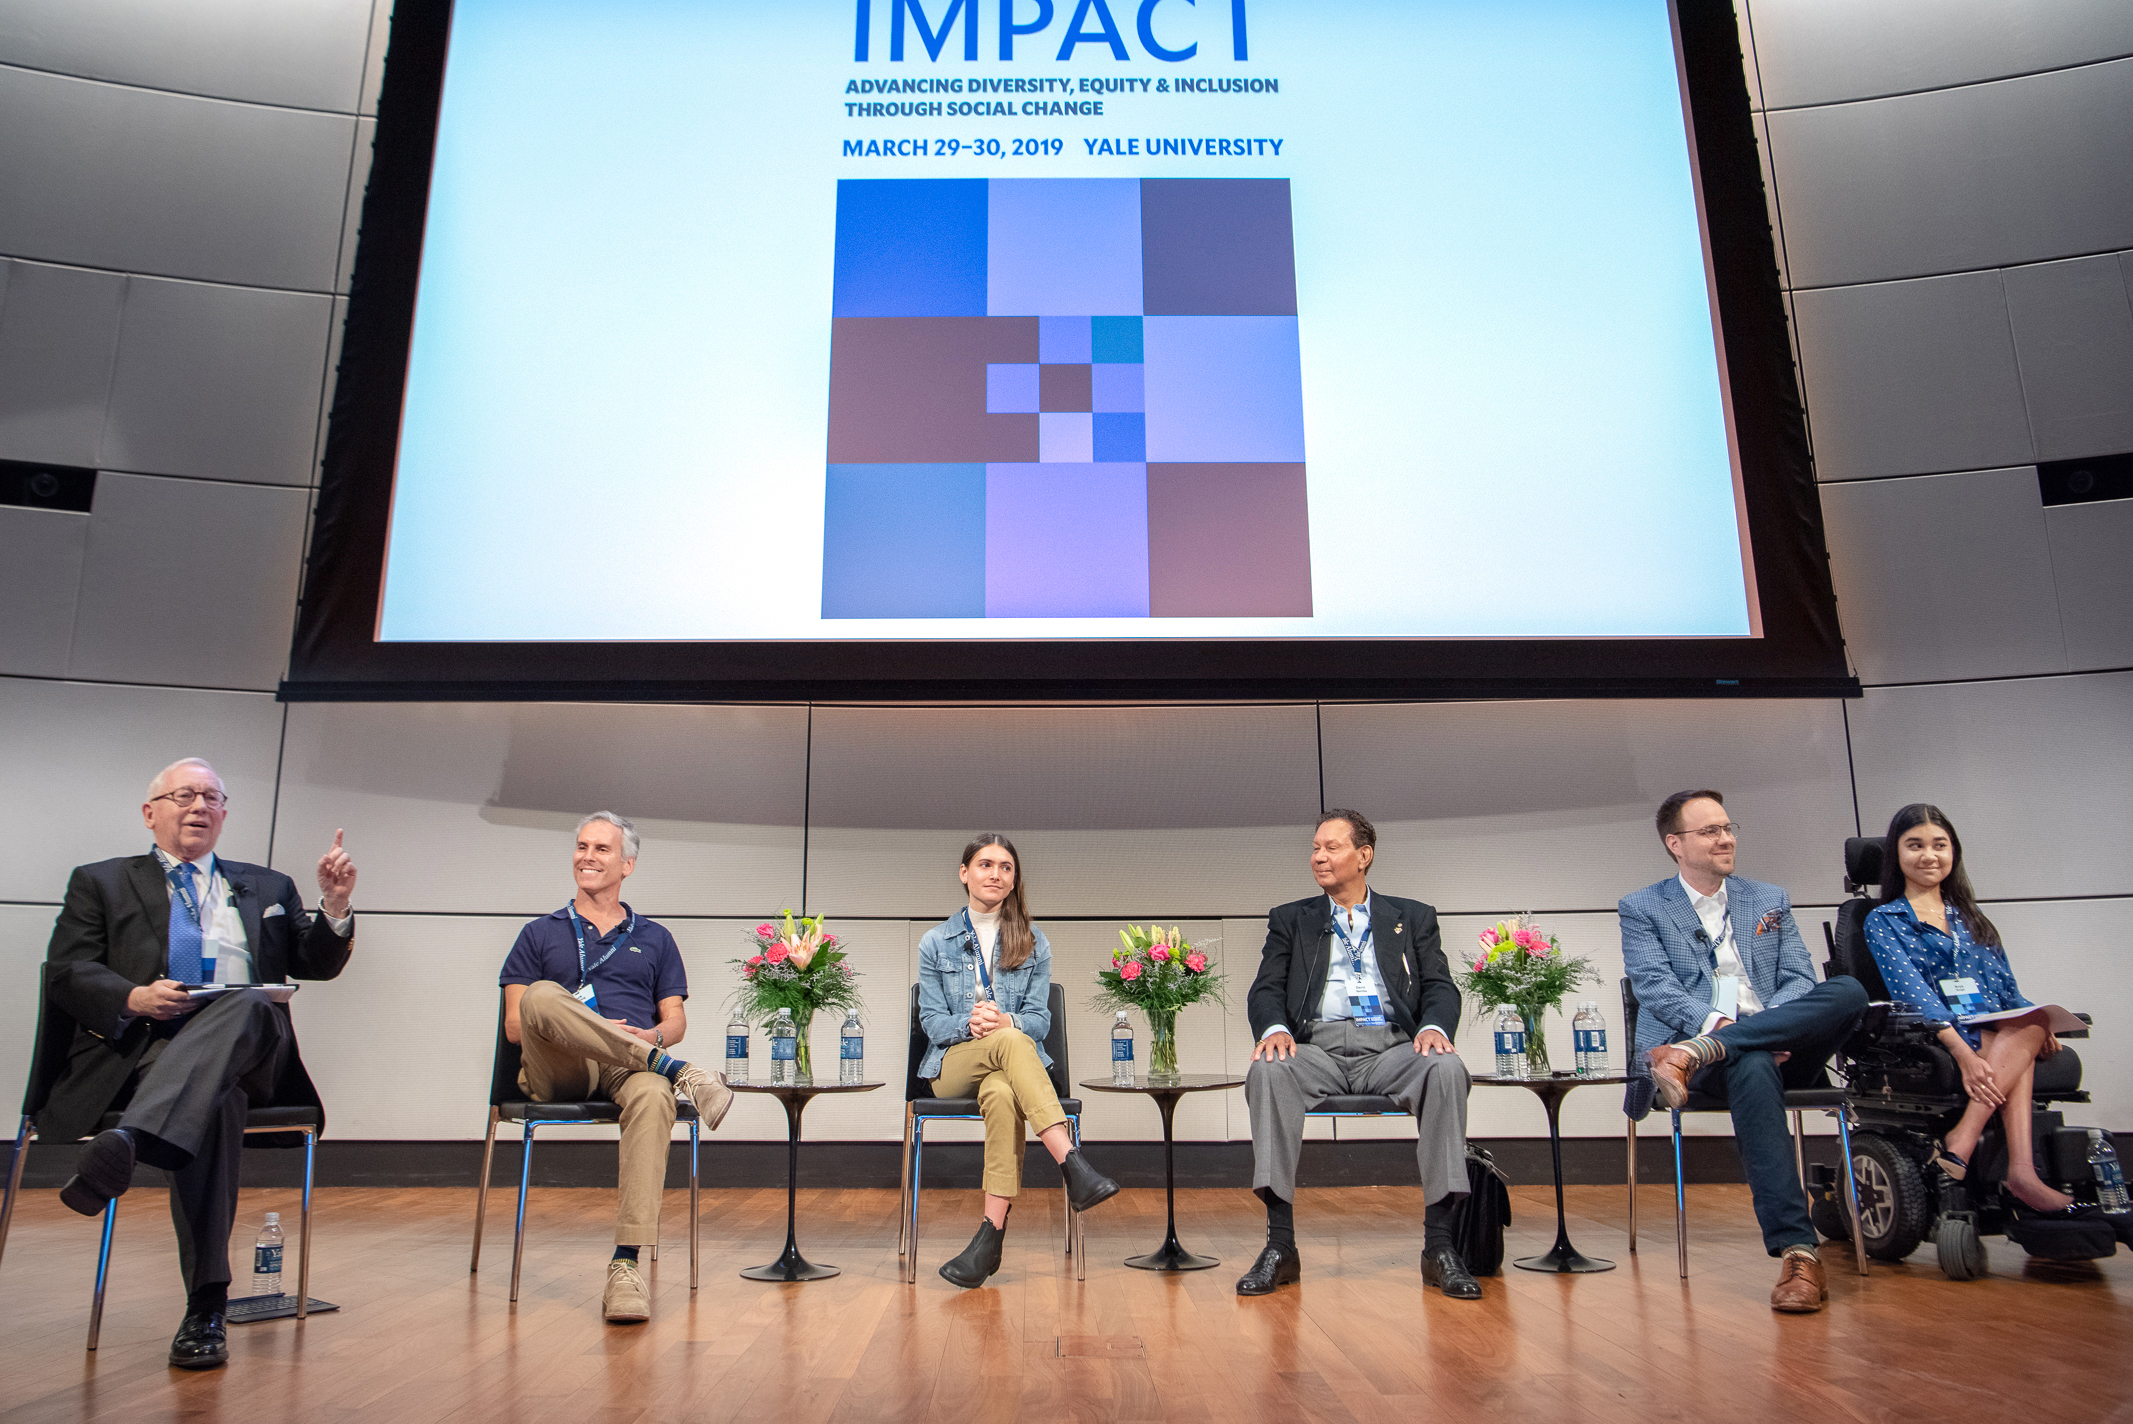 2019 IMPACT Conference image: Panelists on stage